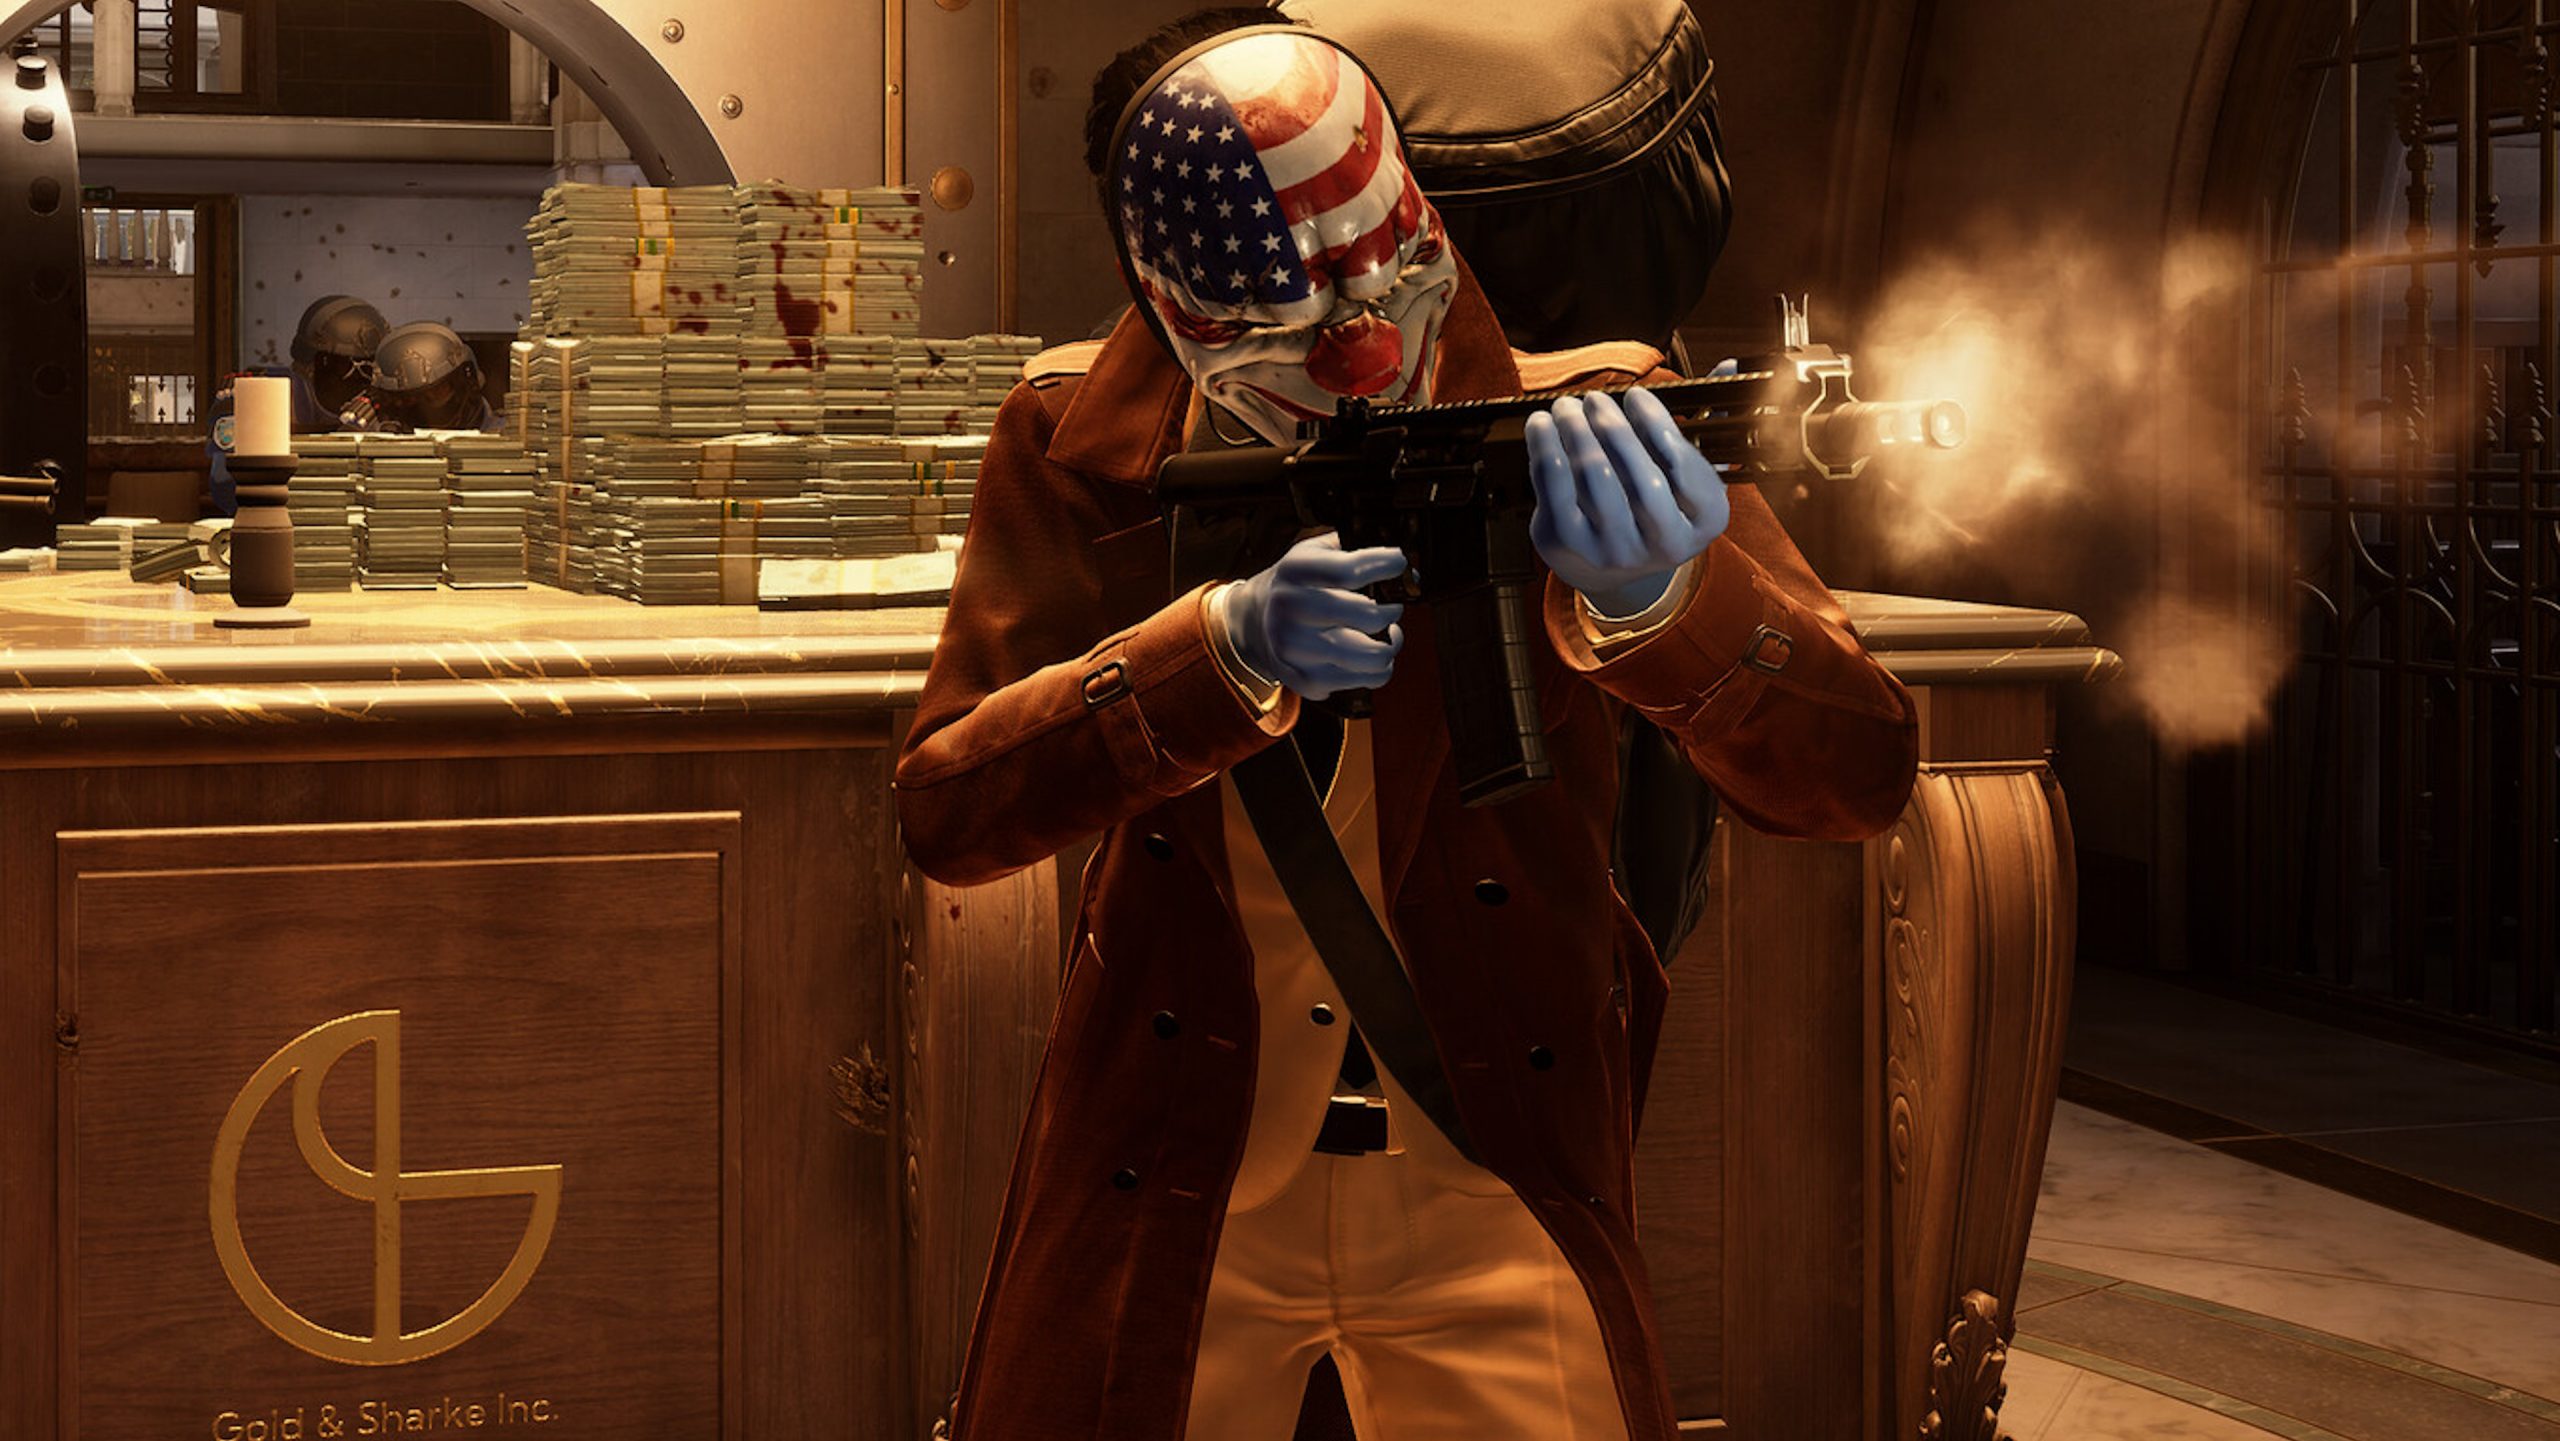 Starbreeze explains ongoing Payday 3 patch delay: ‘There was a significant risk to player progression being wiped’ by update errors